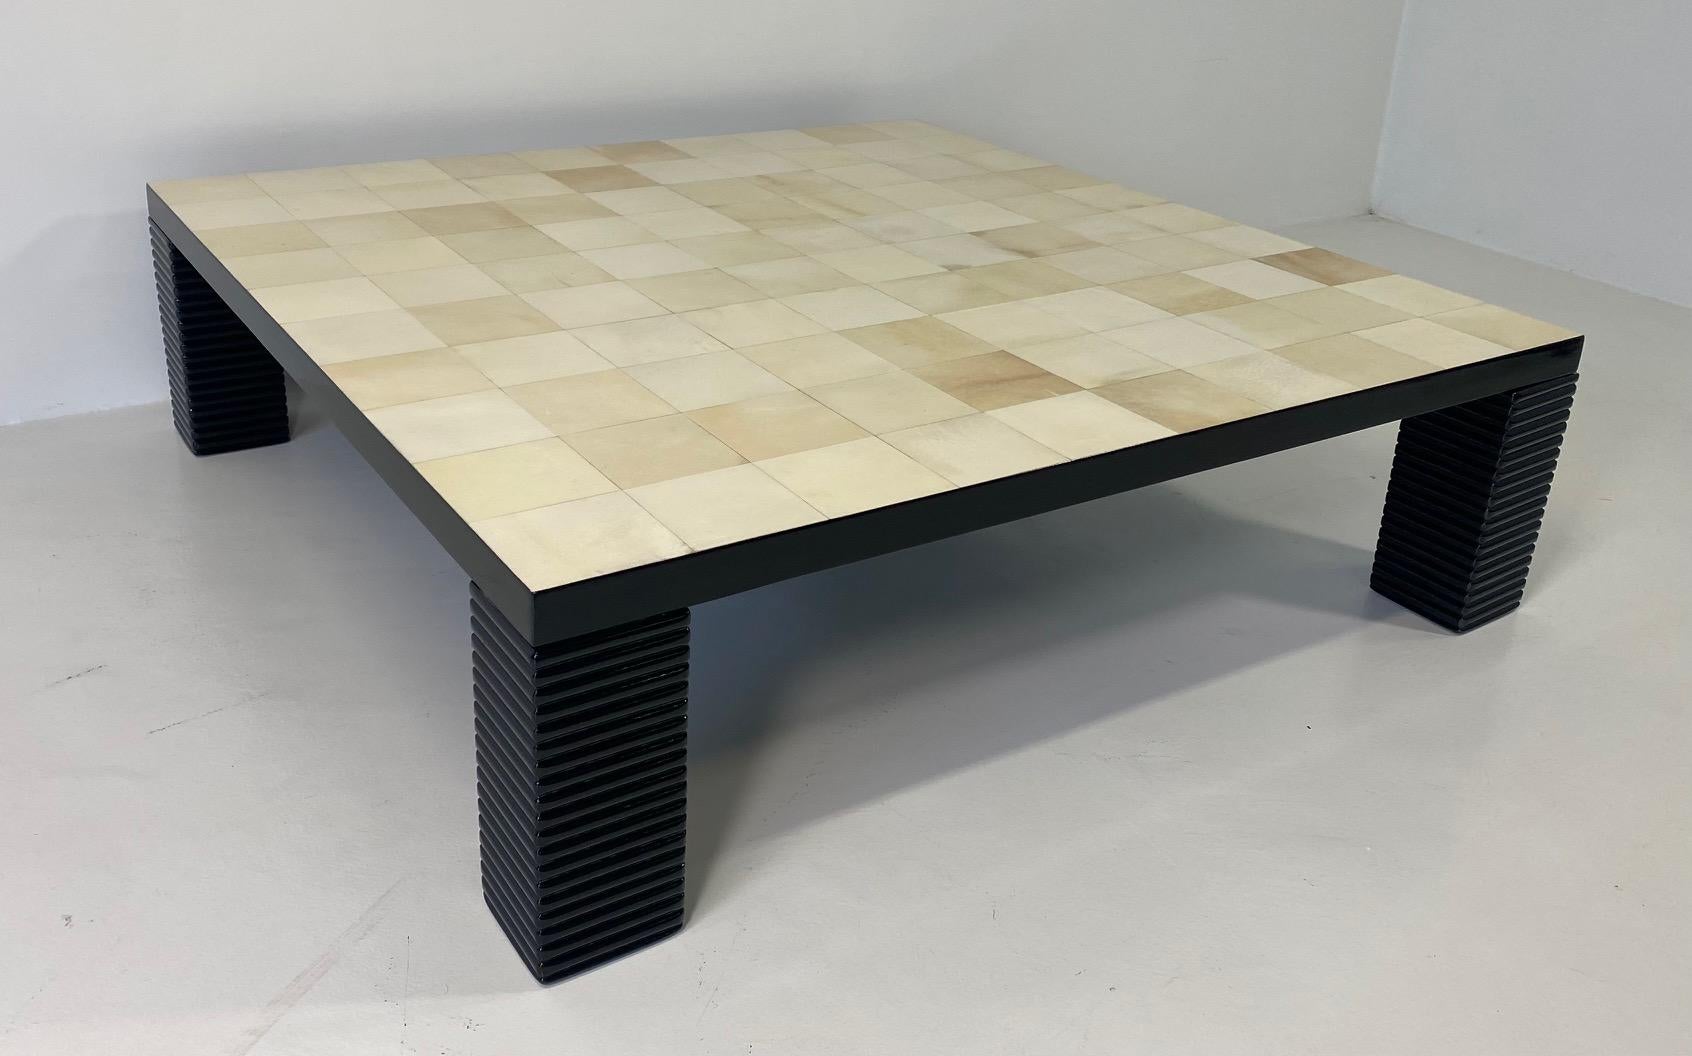 Late 20th Century Italian Art Deco Parchment squares and Black Lacquered Coffee Table For Sale